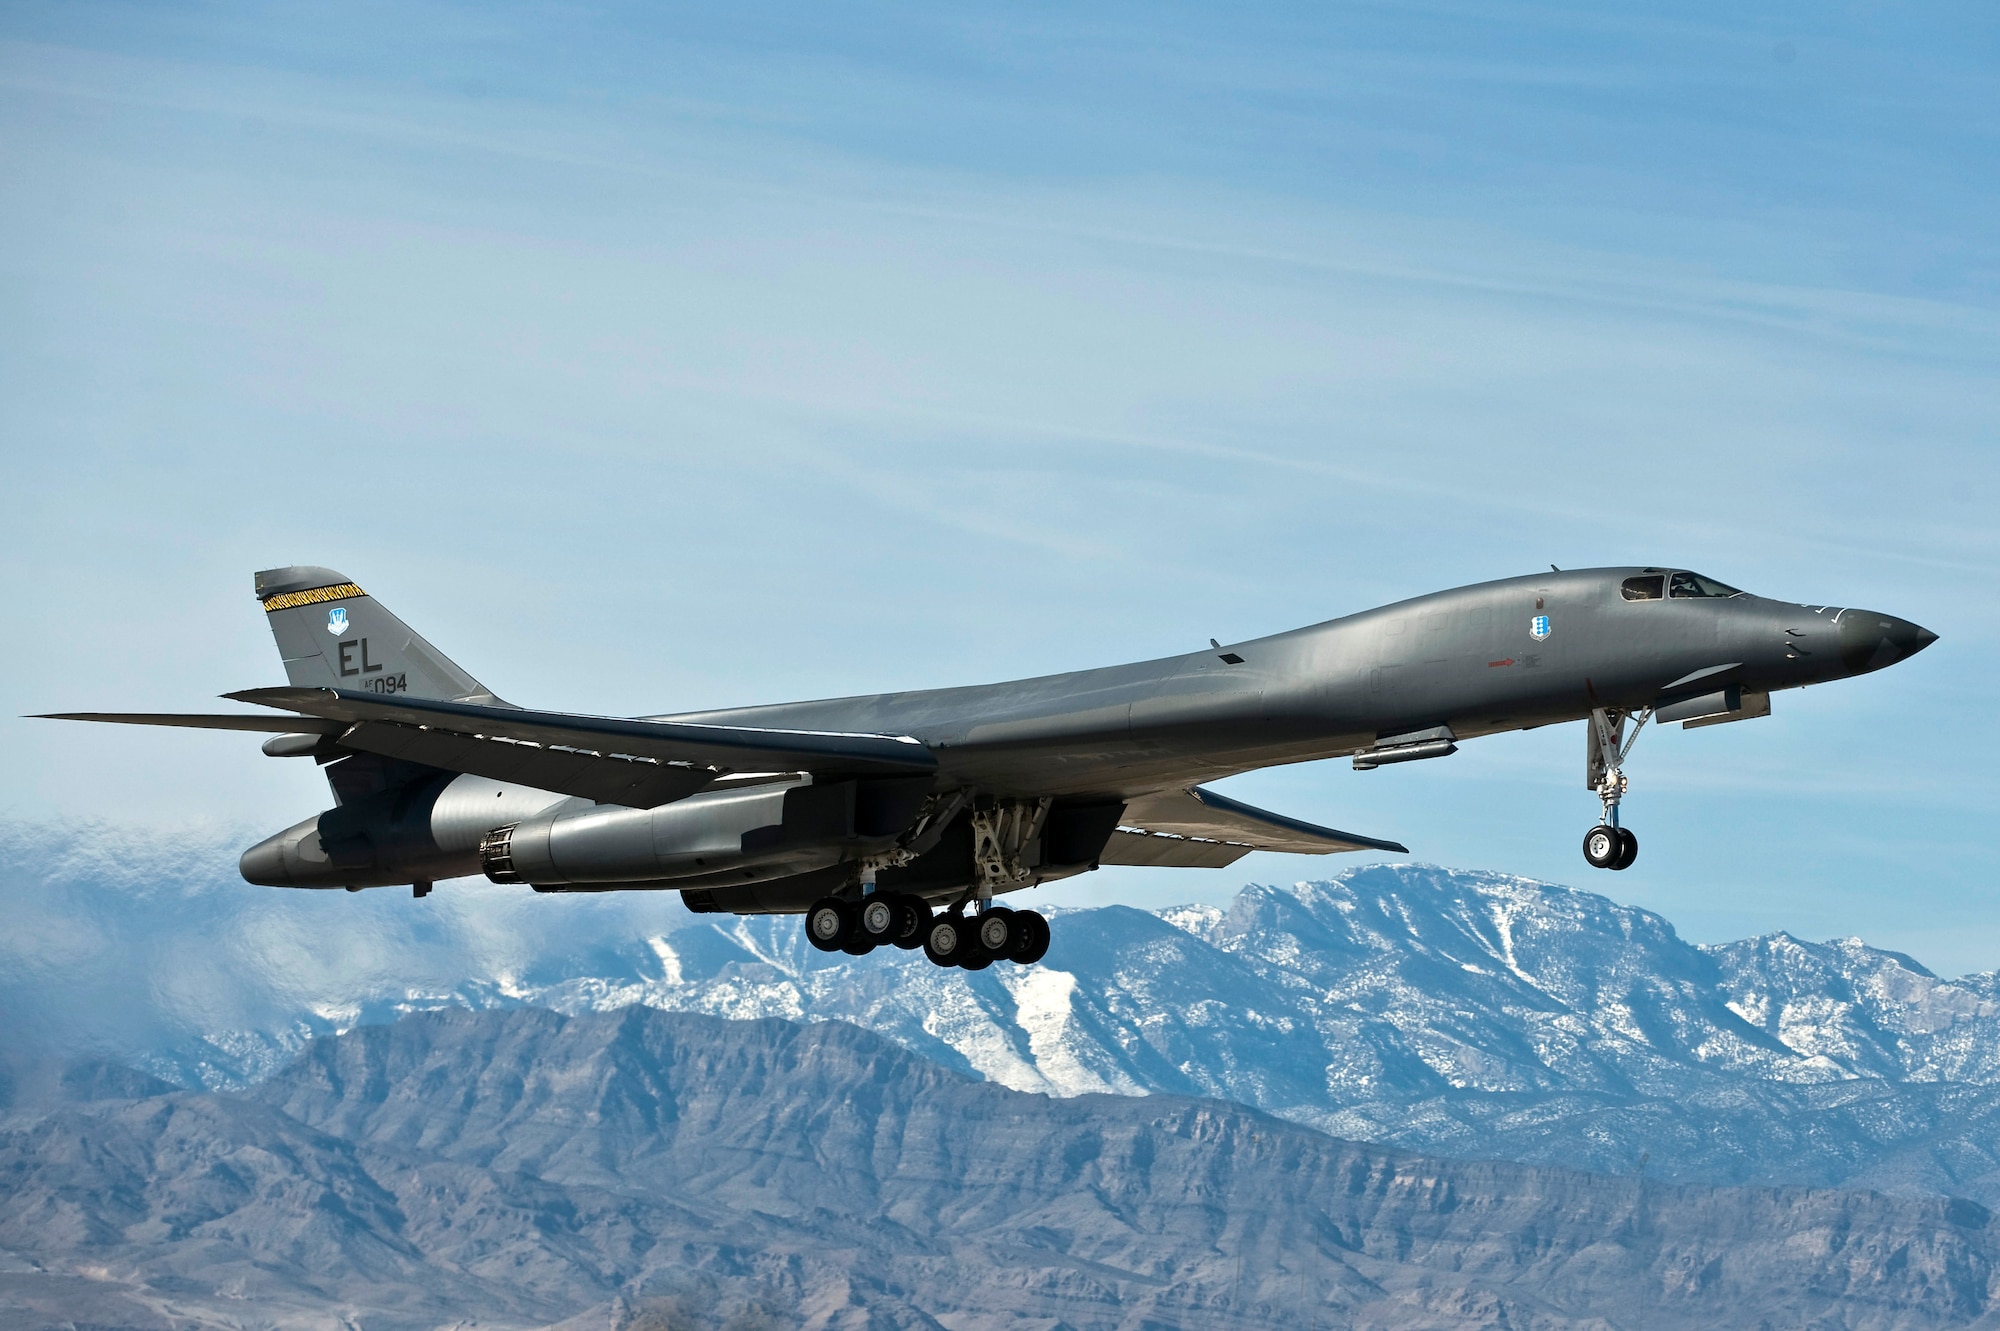 A U.S. Air Force B-1B Lancer departs for a training mission over the Nevada Test and Training Range during Red Flag 12-2 at Nellis Air Force Base, Nev. Red Flag is a combat training exercise involving the air forces of the United States and its allies. The exercise is hosted north of Las Vegas on the NTTR.
(U.S. Air Force photo by Senior Airman Brett Clashman)